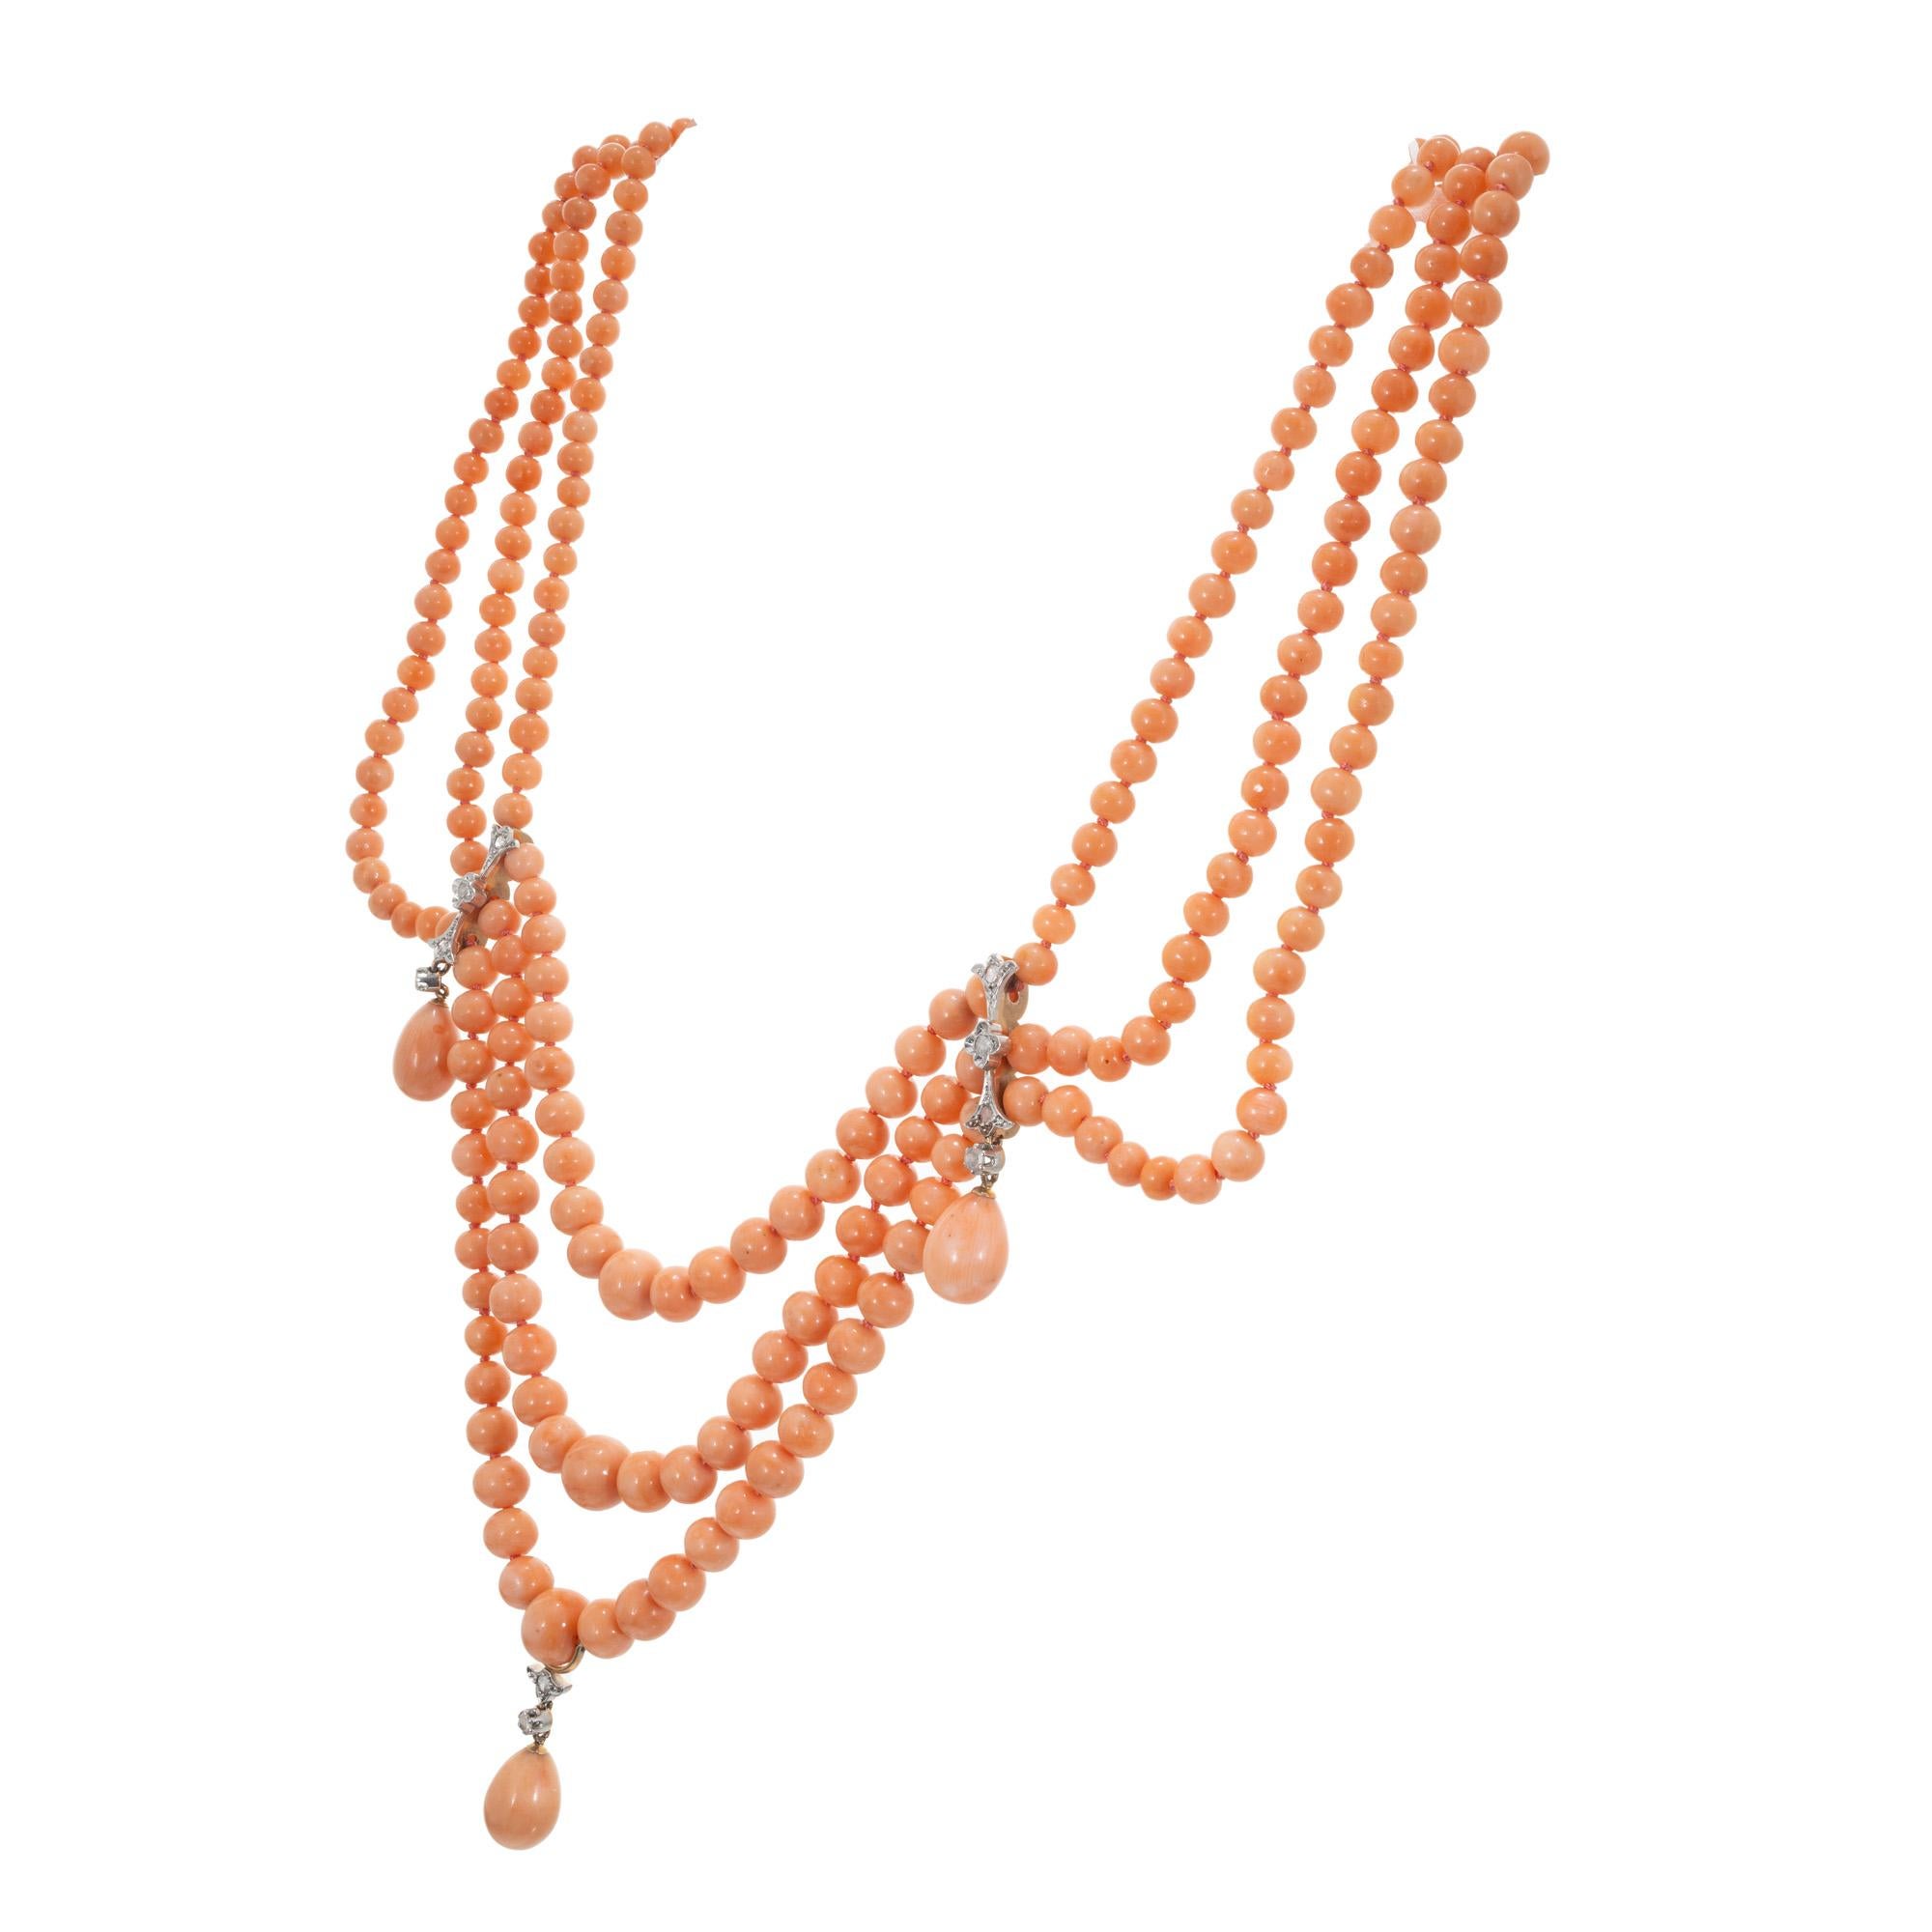 Late 1800's Victorian Three Strand coral bead necklace. This necklace showcases the radiant beauty of coral, which is known for its alluring hues and unique texture. The three strands of coral of well matched beads strung together. The vibrant coral